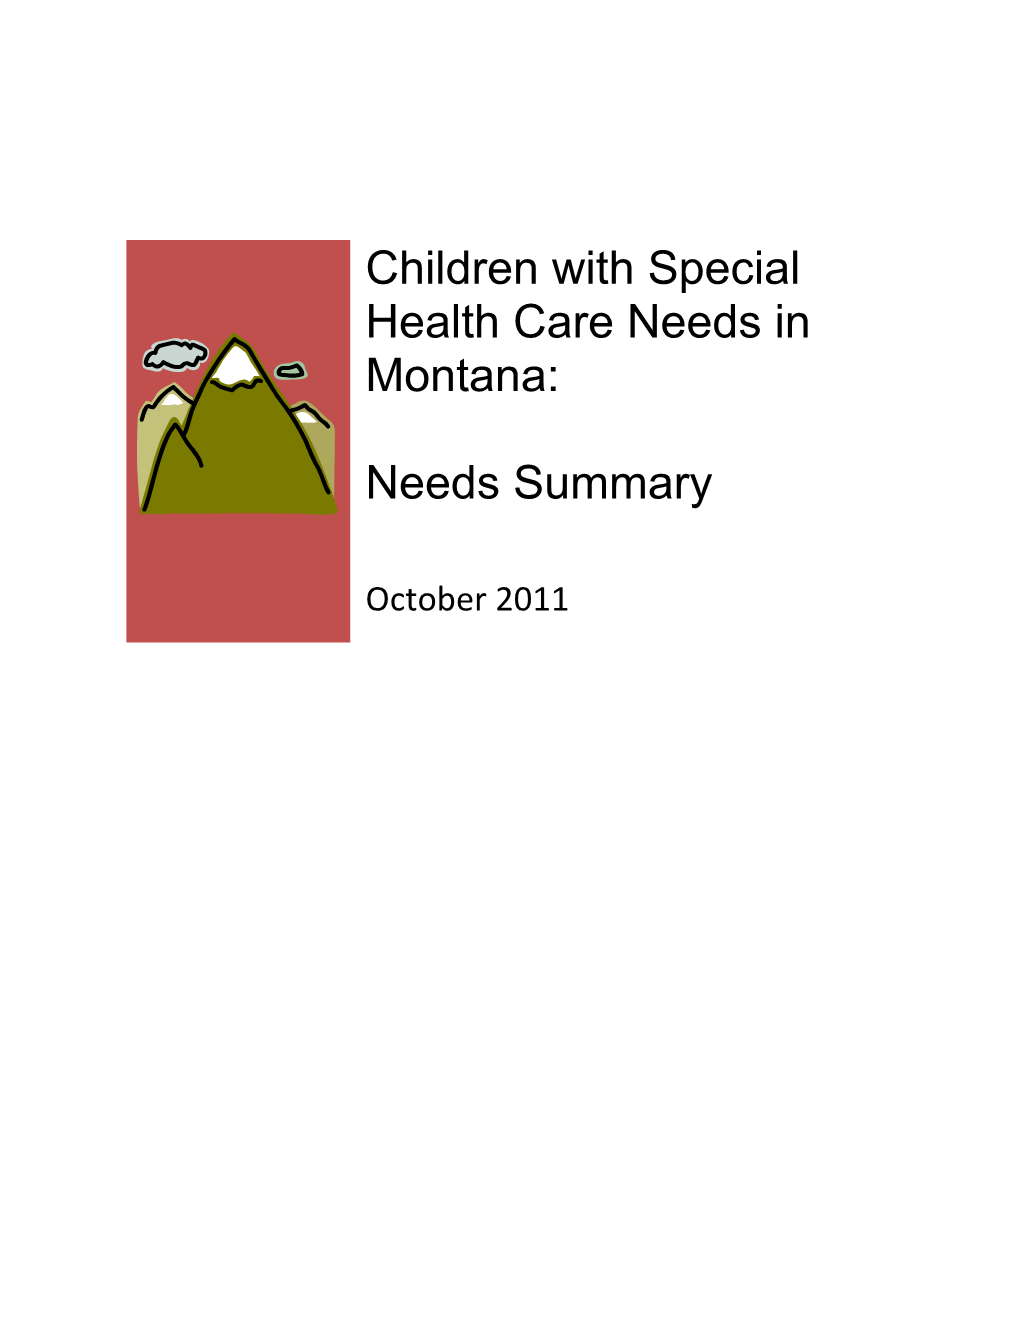 Children with Special Health Care Needs in Montana: Needs Assessment